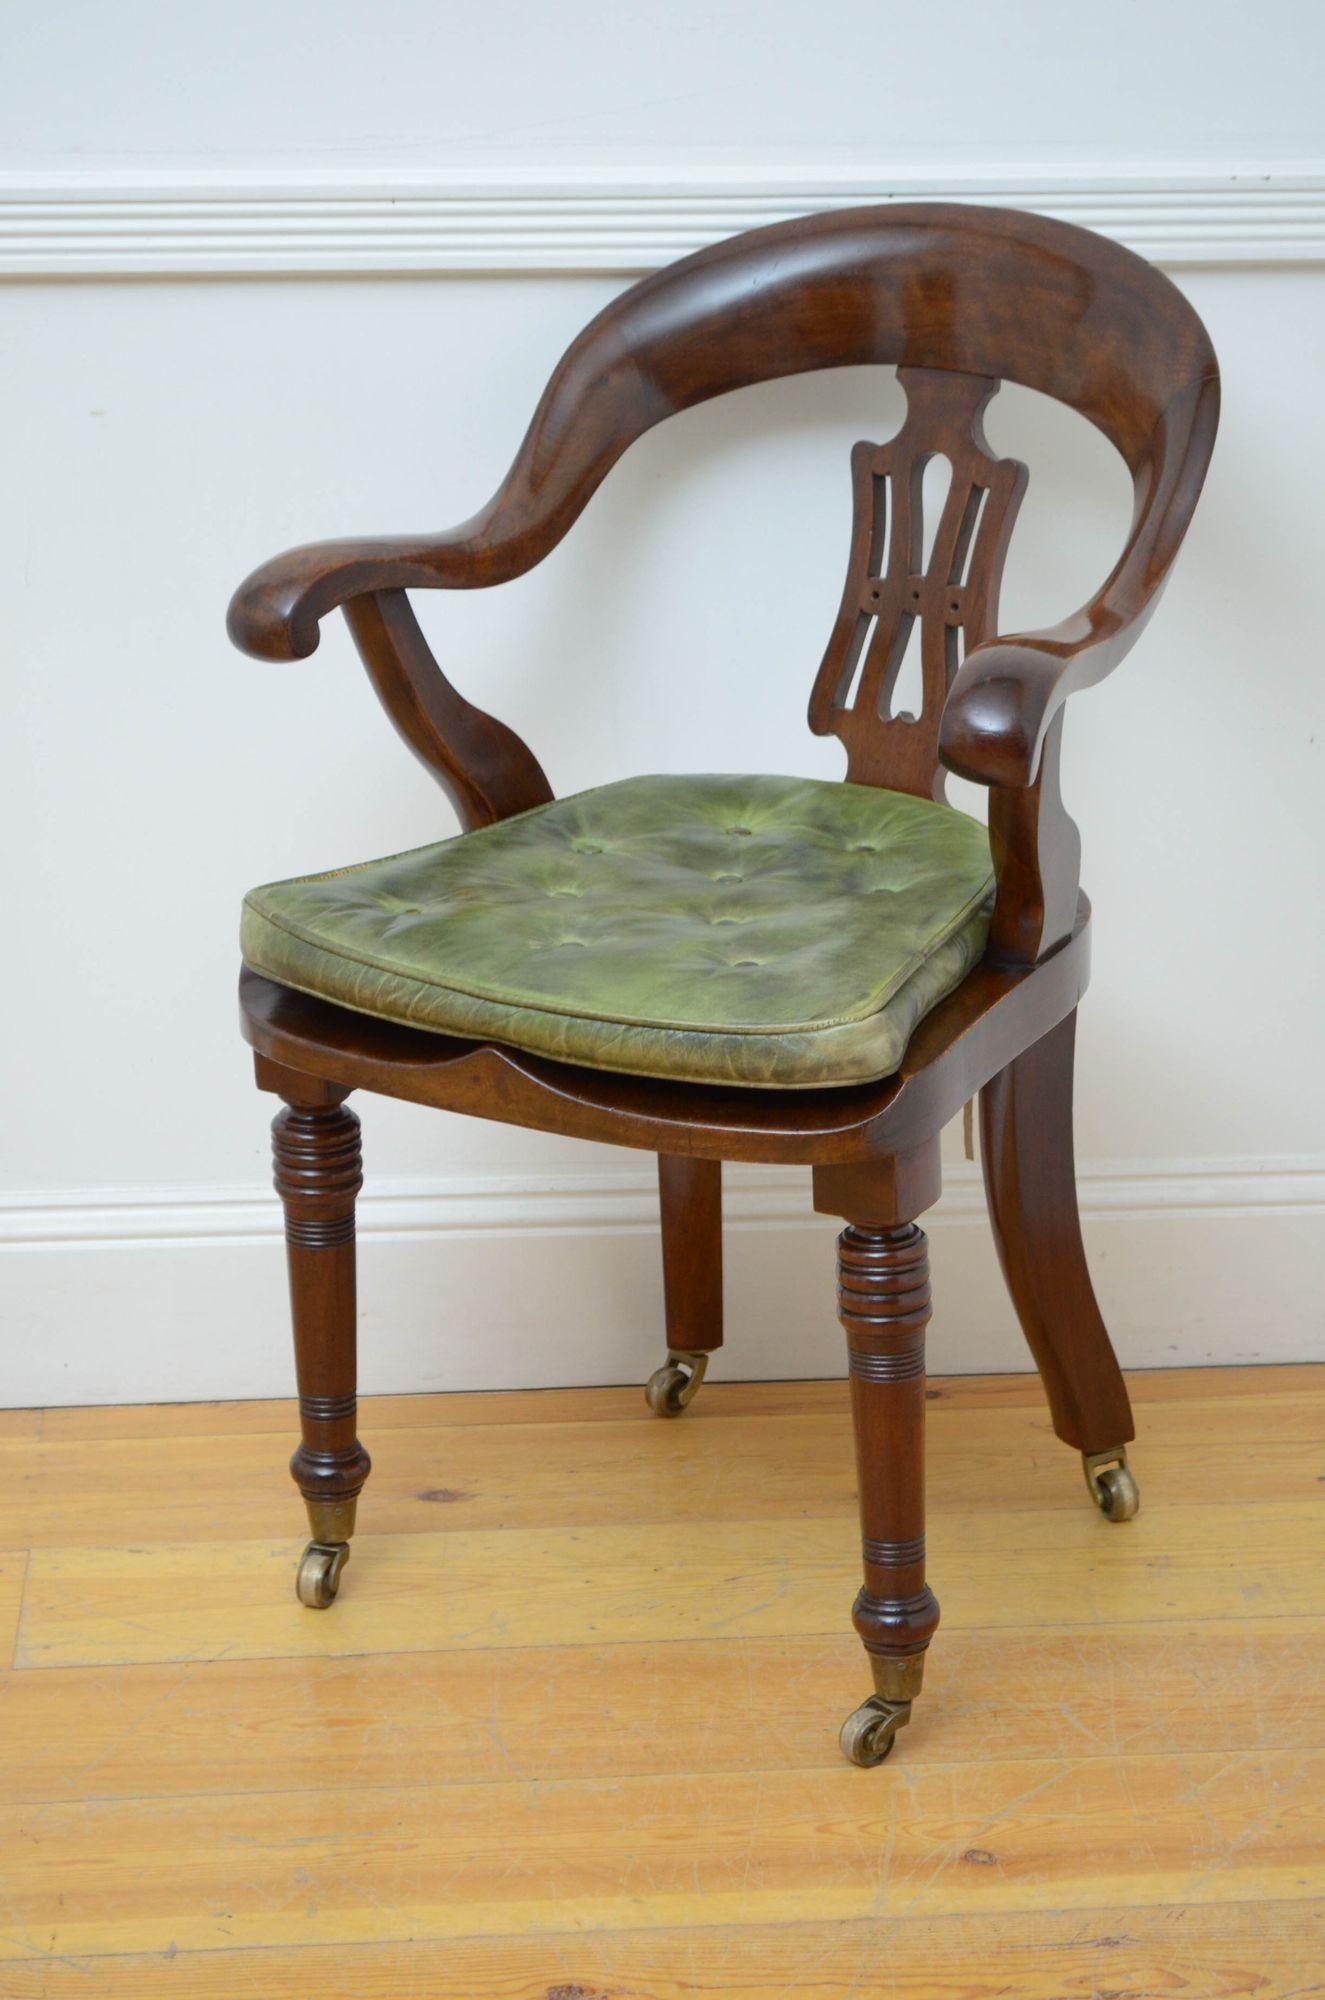 Sn5283 Victorian office chair or desk chair, having shaped back rail with carved centre splat and downswept arms and generous seat with green leather cushion, all standing on turned and ringed legs and castors. This antique chair retains its